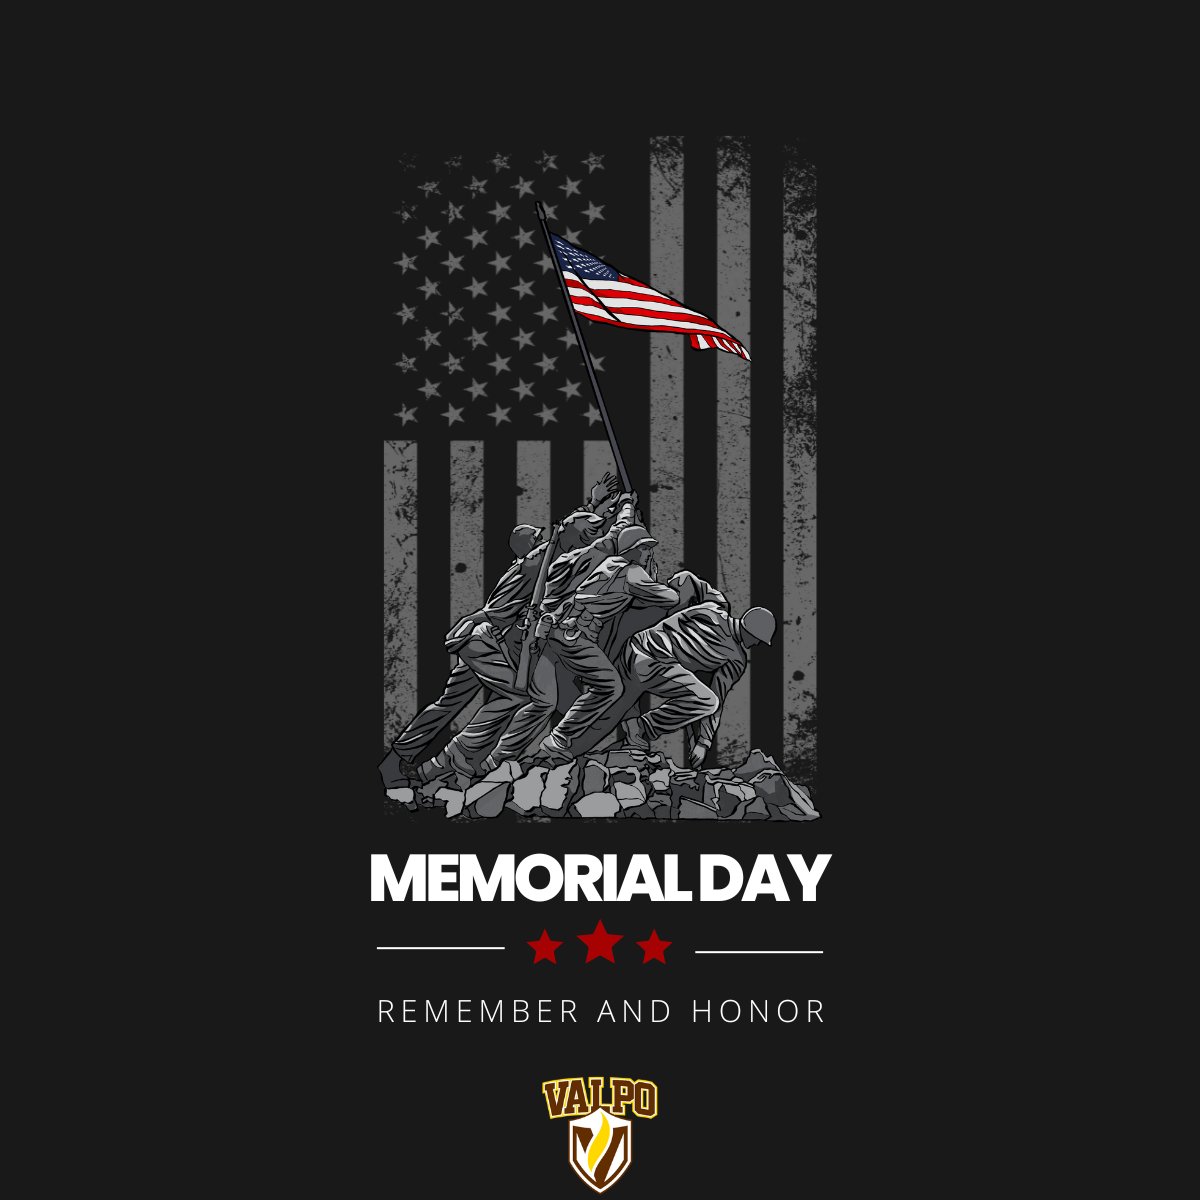 Today we honor and pay our respects to the brave men and women who gave the ultimate sacrifice in service to our country.